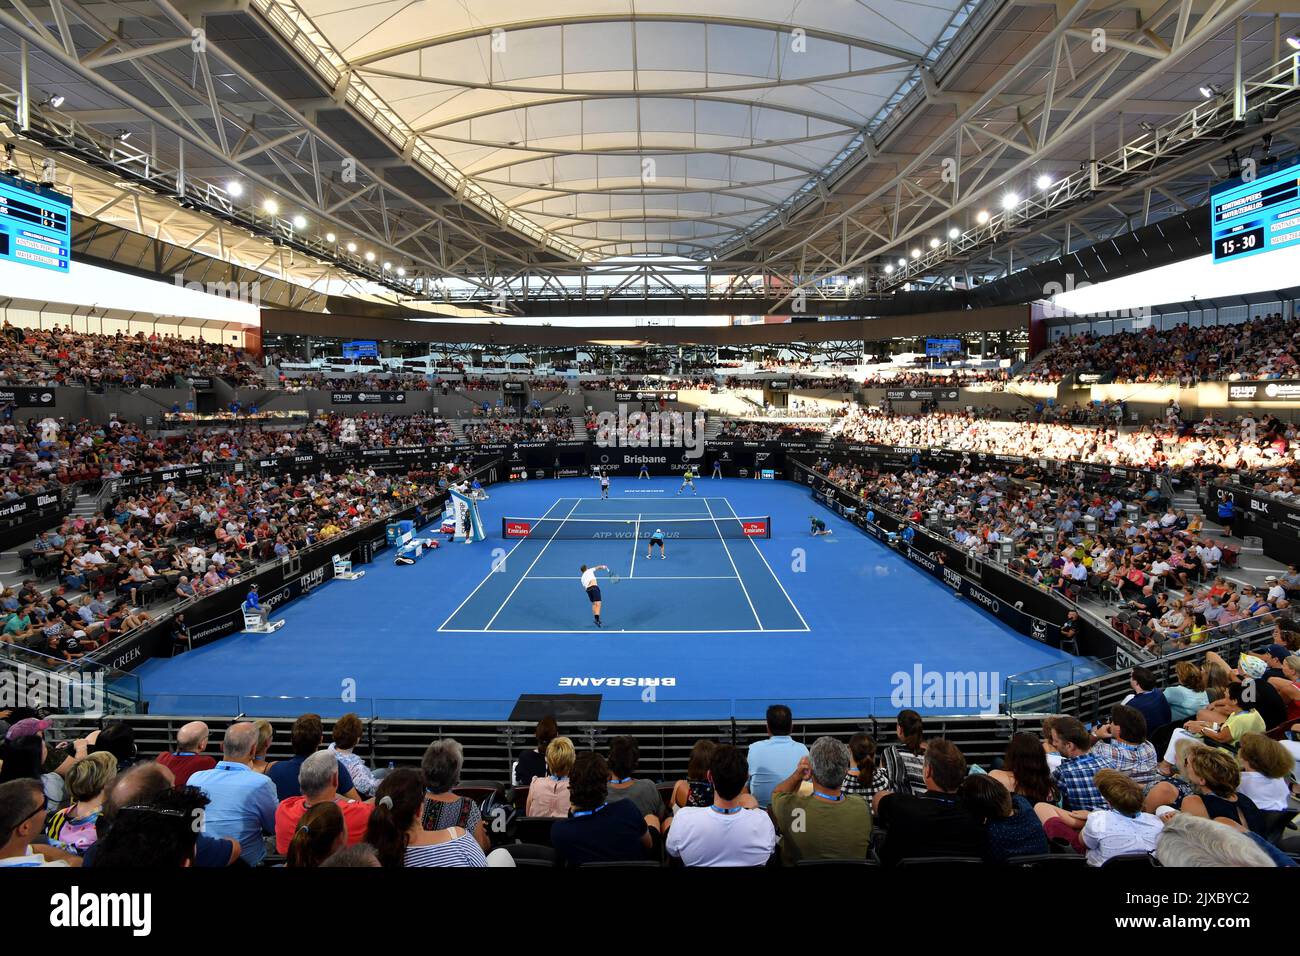 General view of Pat Rafter Arena during the men's doubles final played  between Henri Kontinen of Finland and John Peers of Australia against  Leonardo Mayer and Horacio Zeballos of Argentina at the